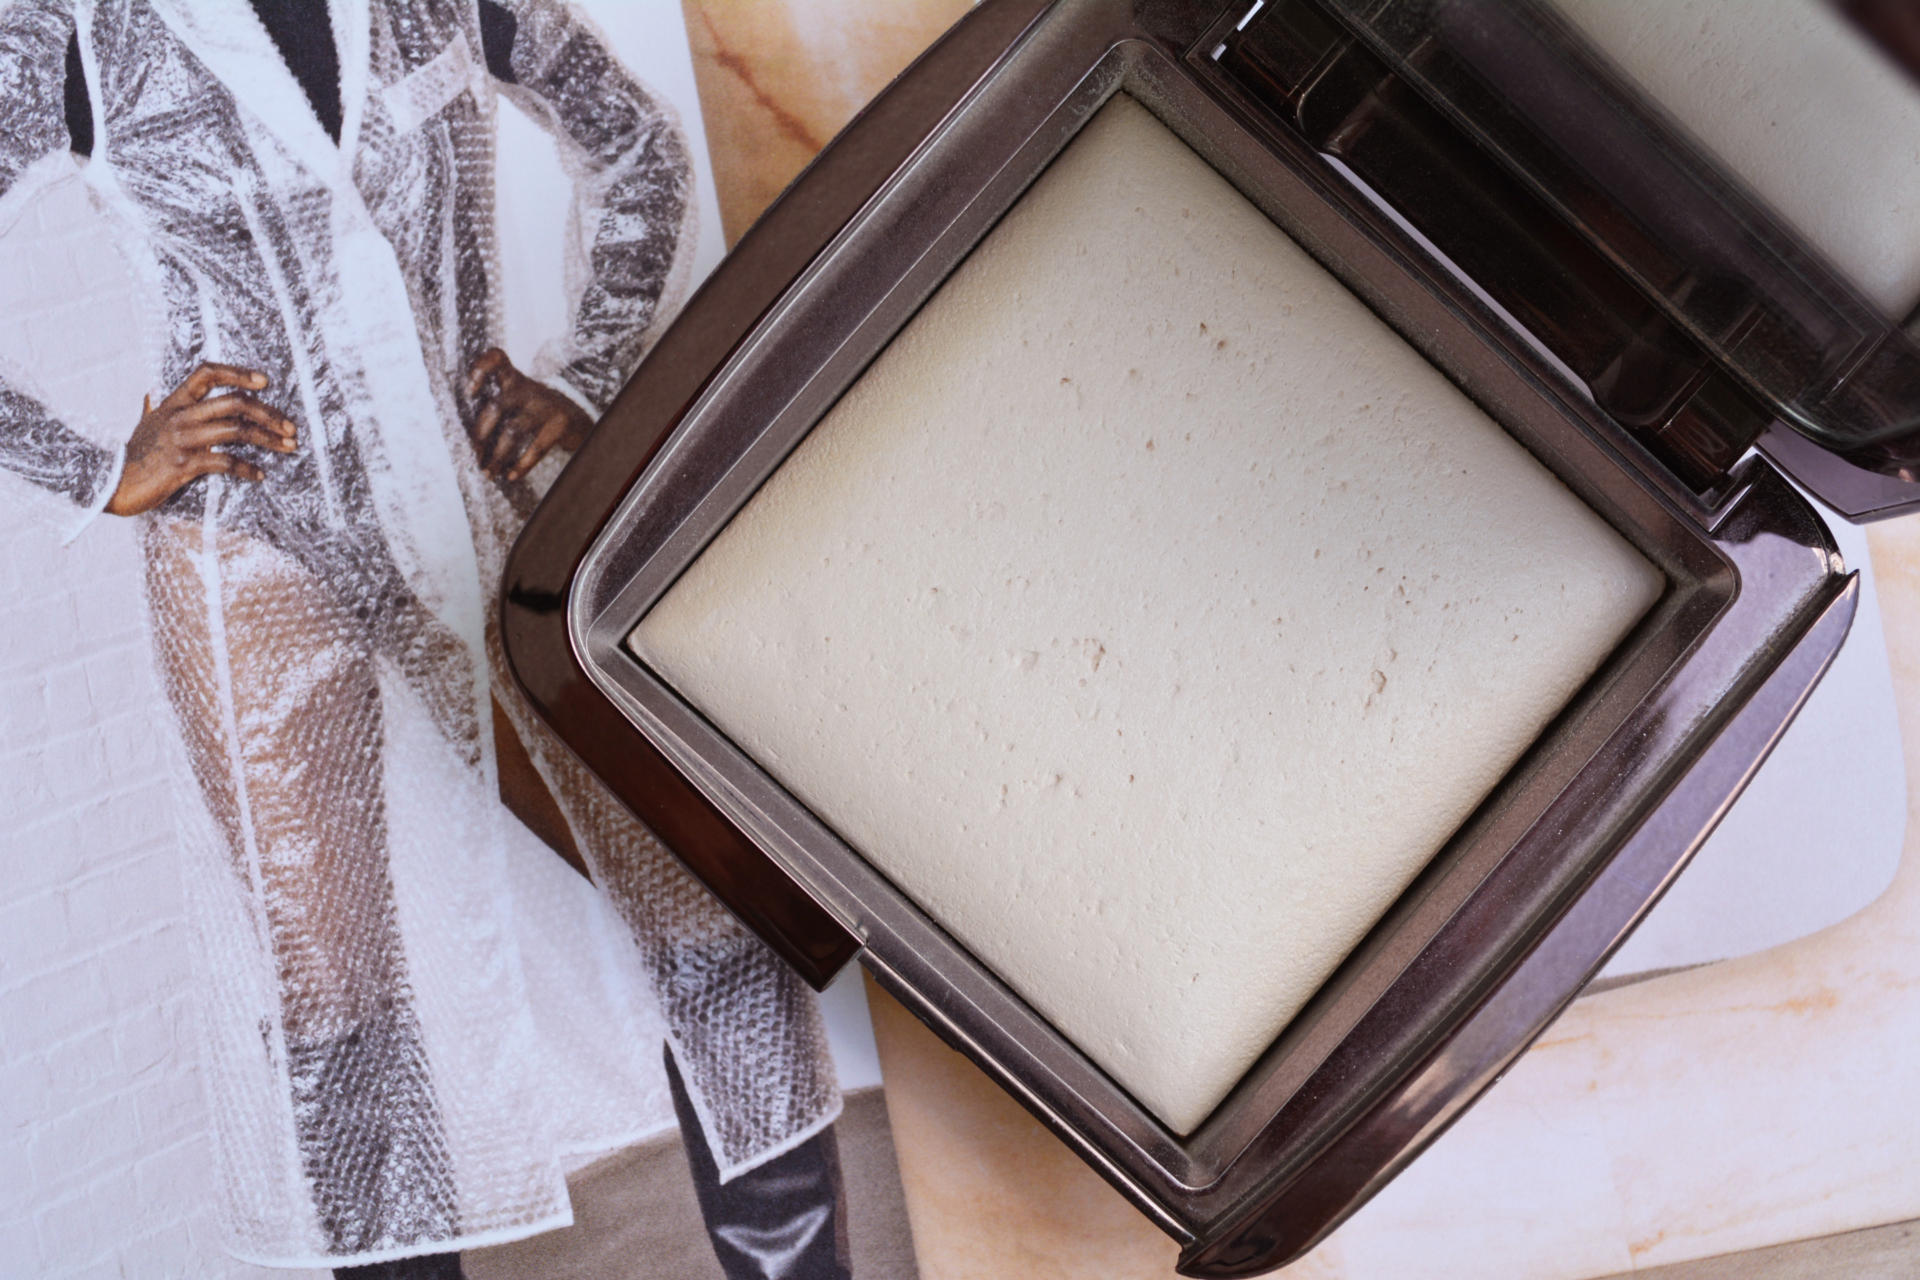 Hourglass Ambient Lighting Powder Ethereal Light